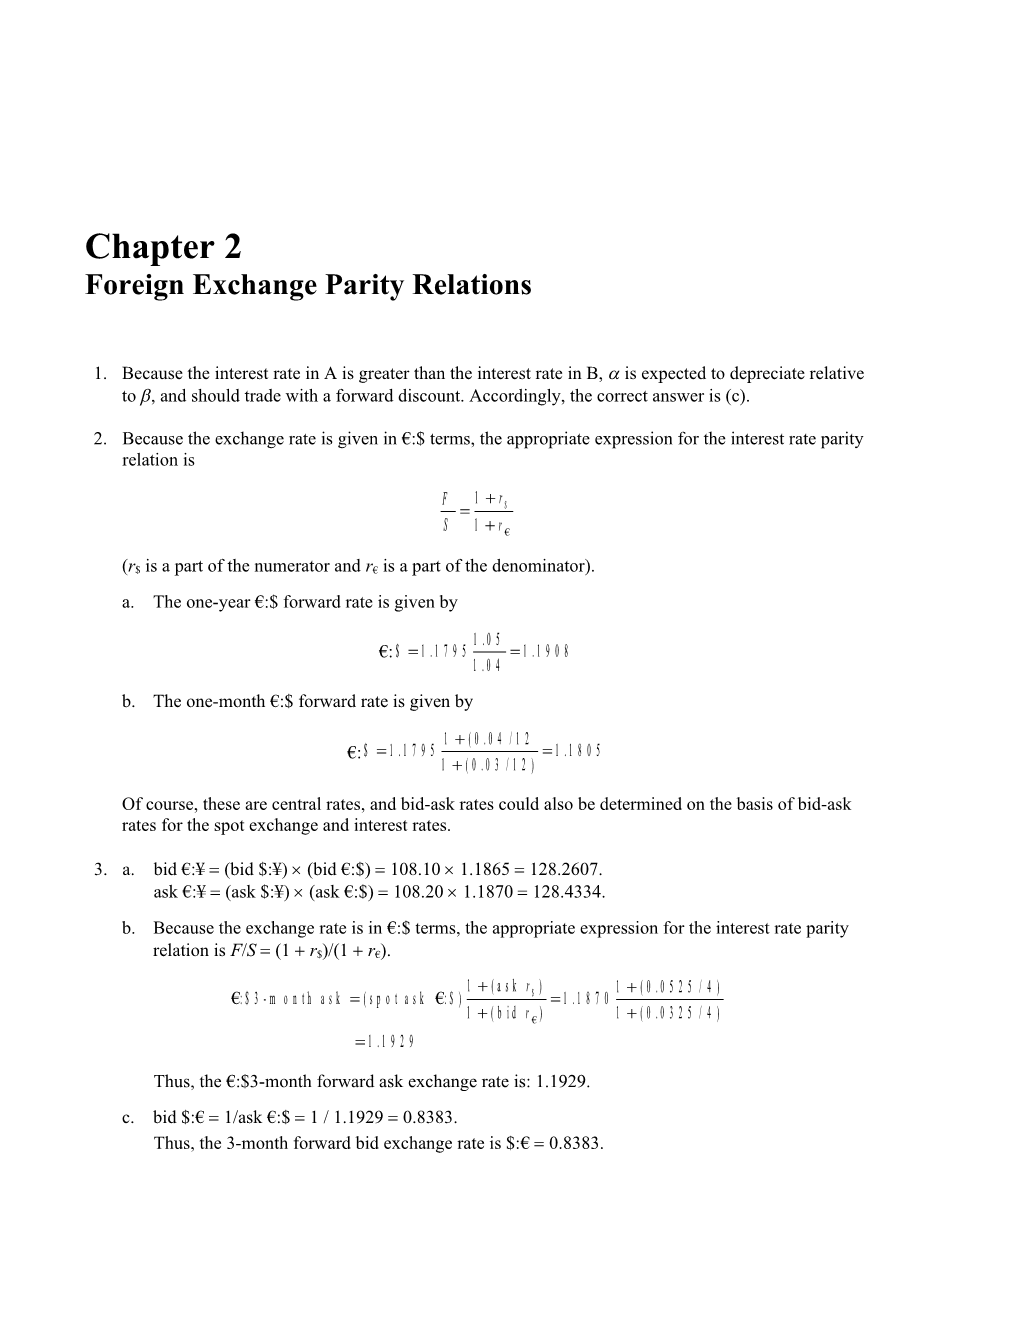 Chapter 2 Foreign Exchange Parity Relations